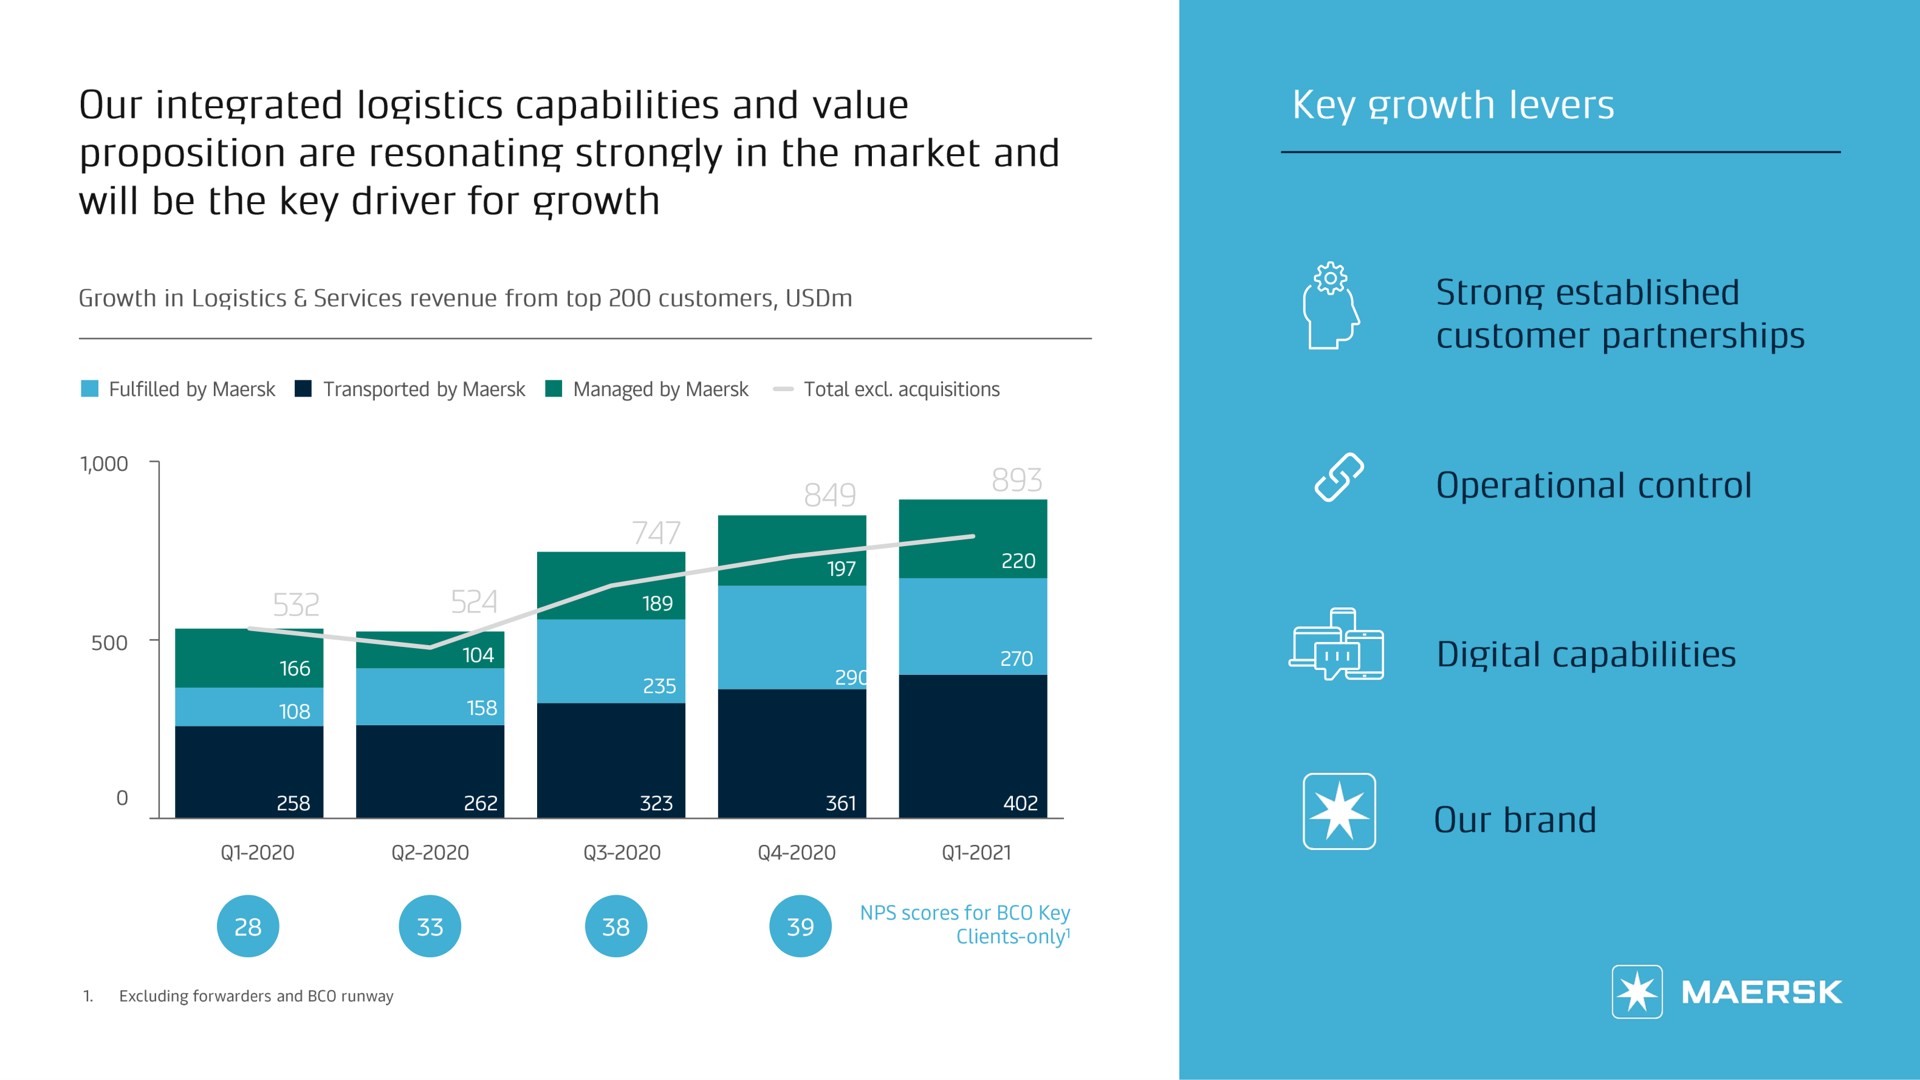 our integrated logistics capabilities and value proposition are resonating strongly in the market and will be the key driver for growth key growth levers | Maersk